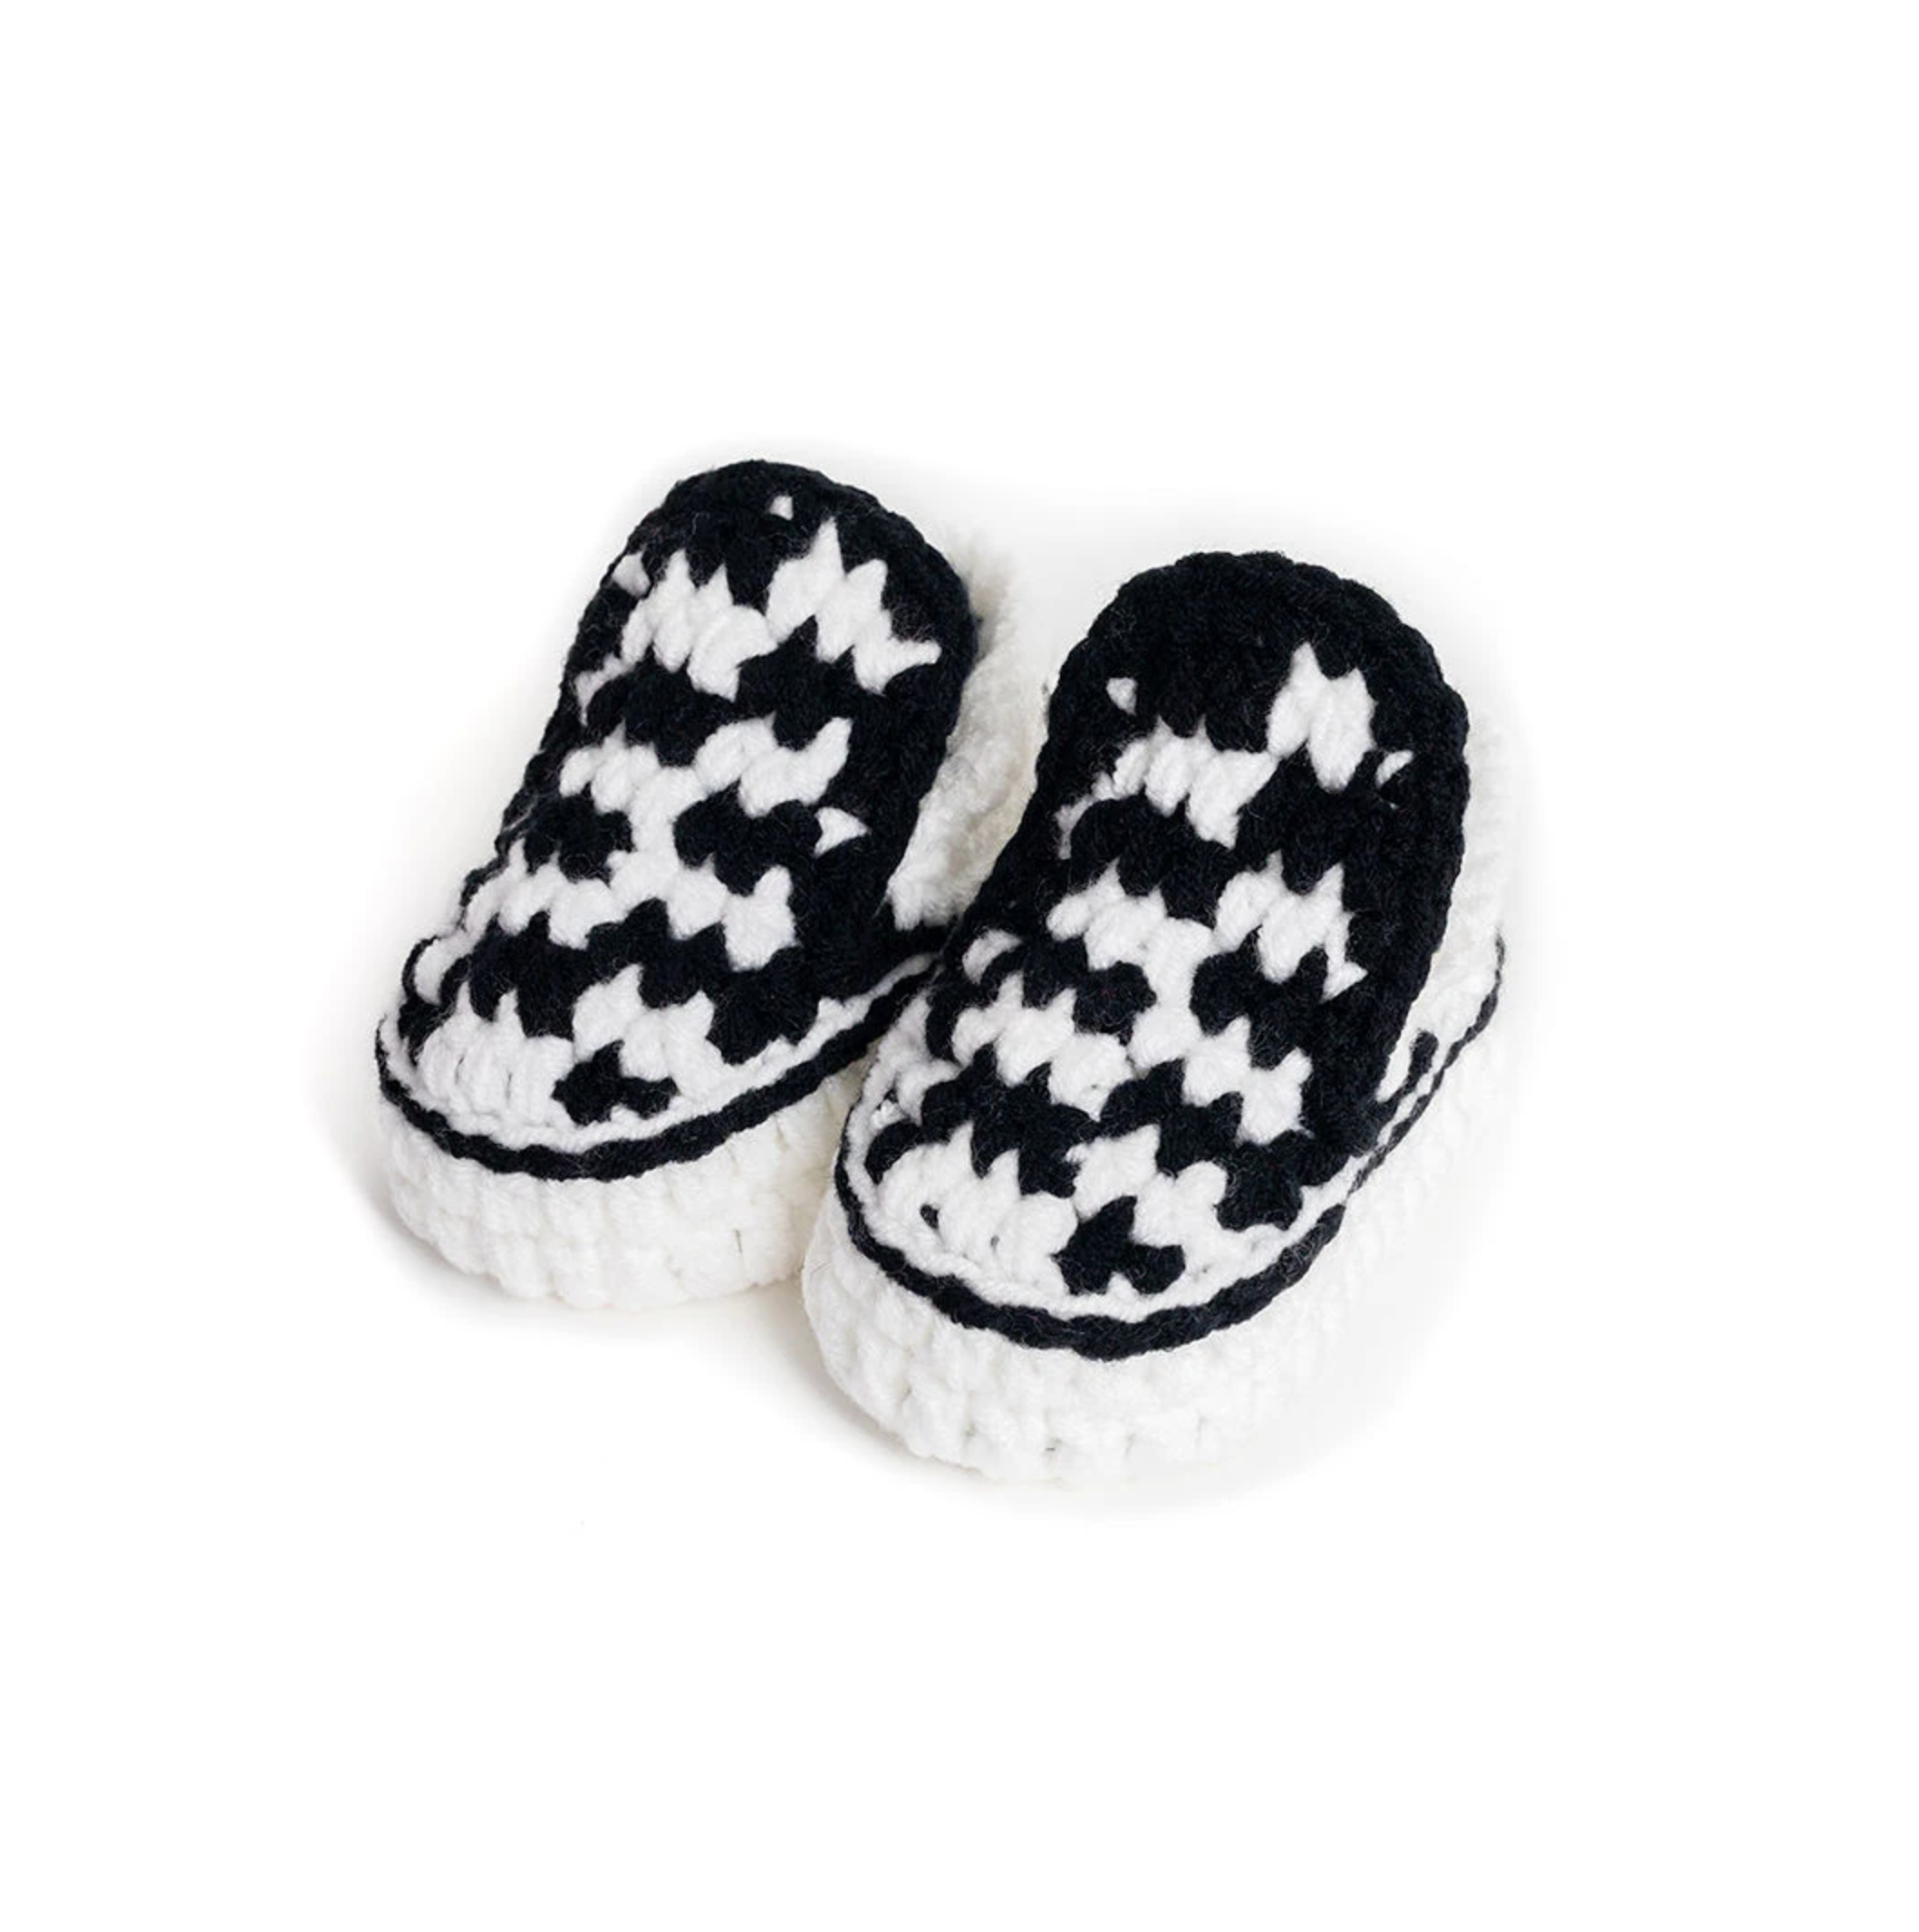 Checkered Crochet Baby Shoes